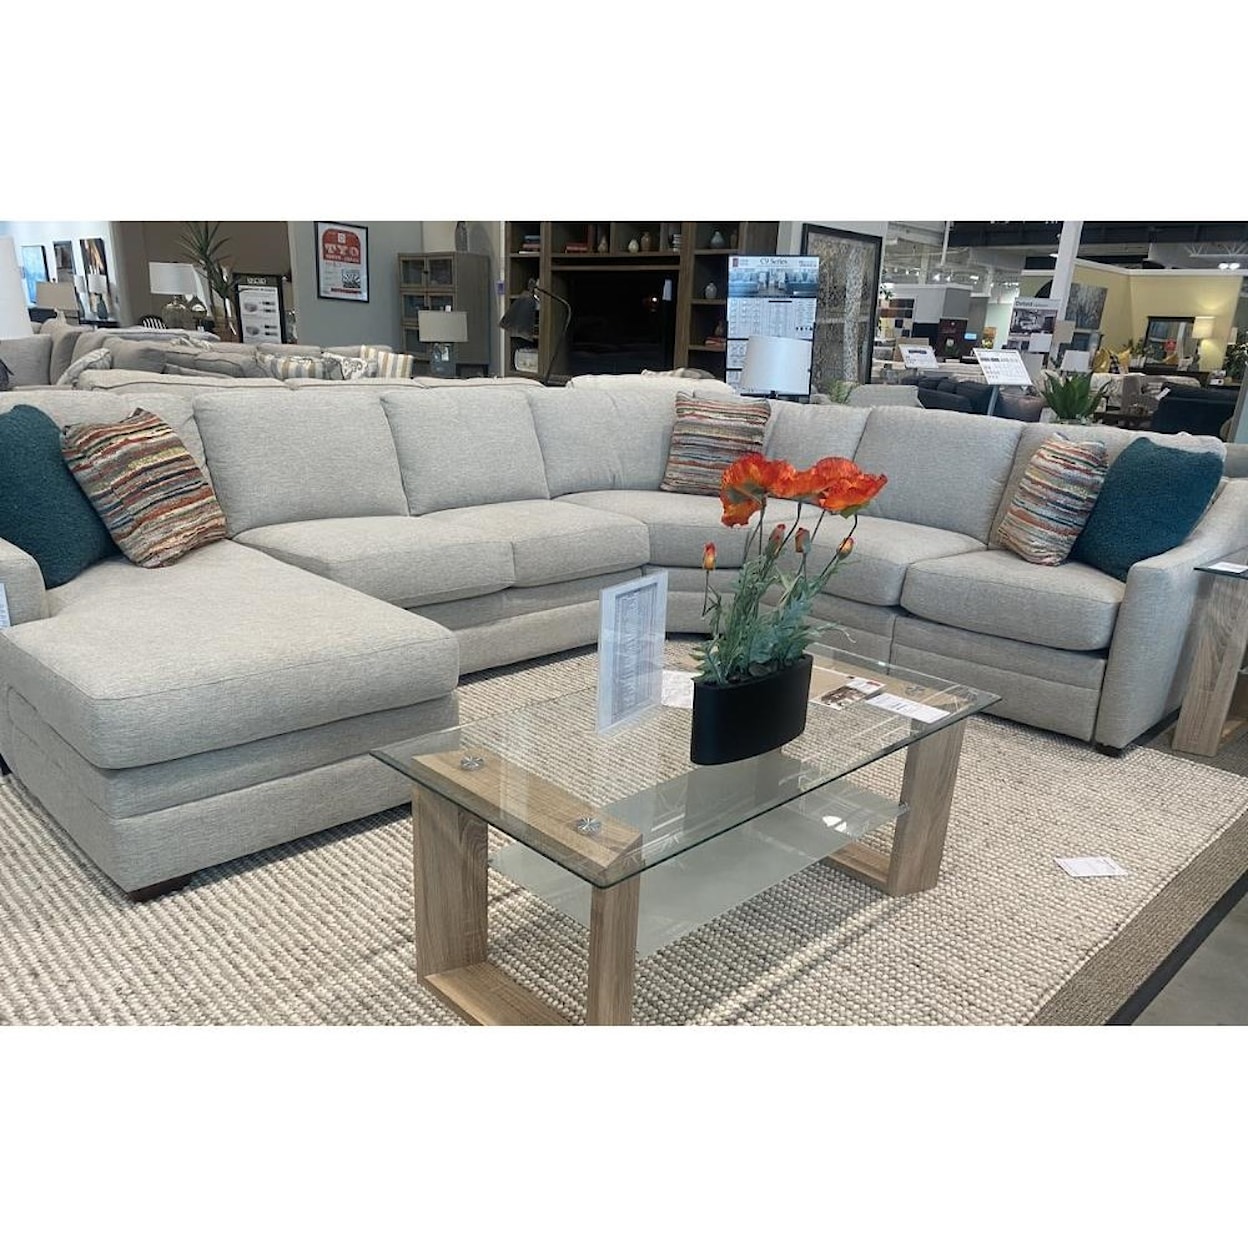 Craftmaster F9 Design Options Sectional